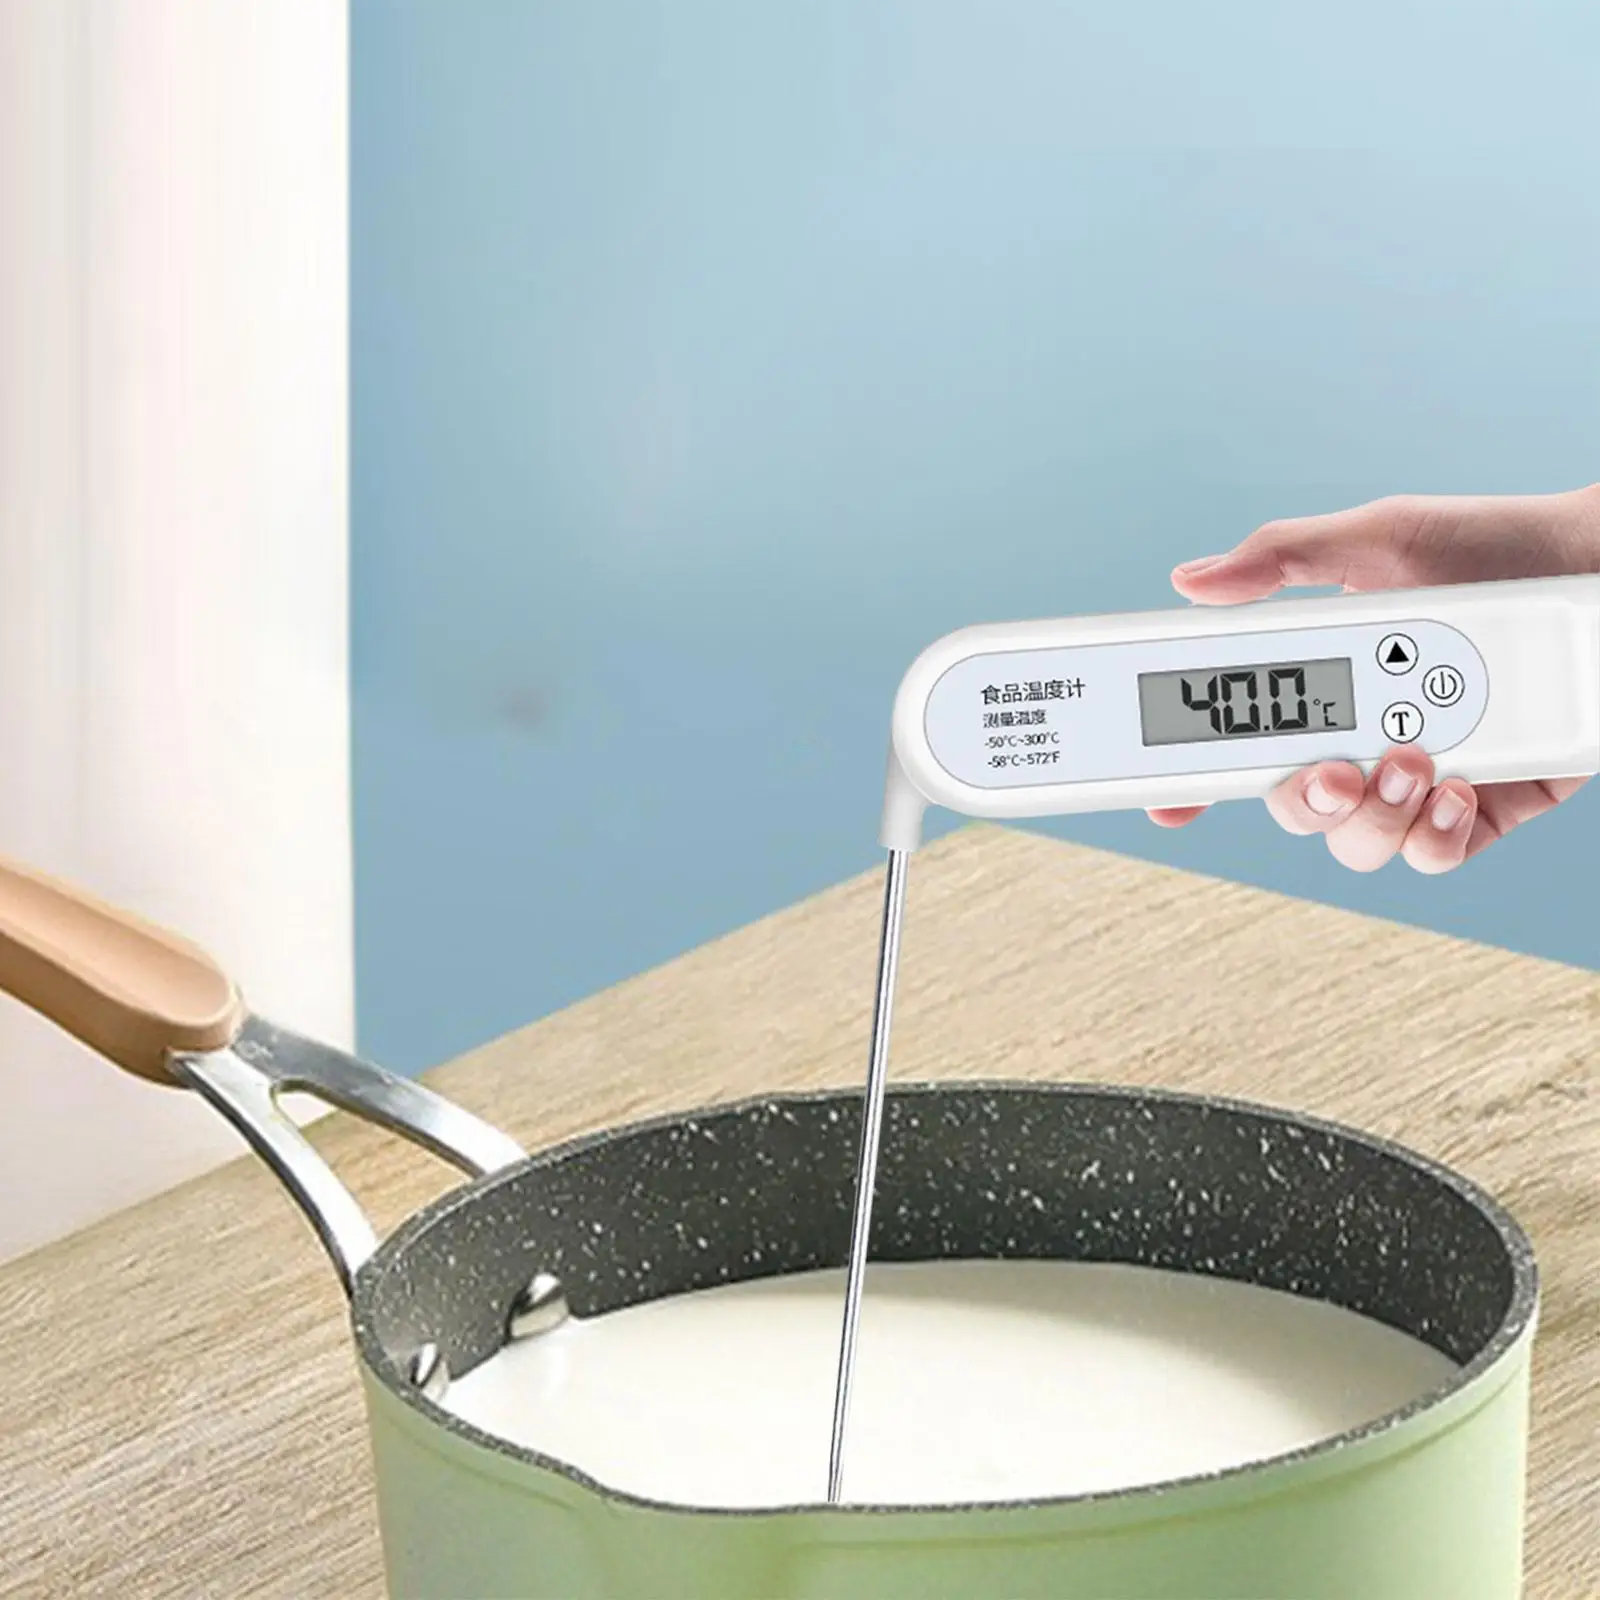 Digital Food Thermometer with Folding Probe High Accuracy for BBQ Water